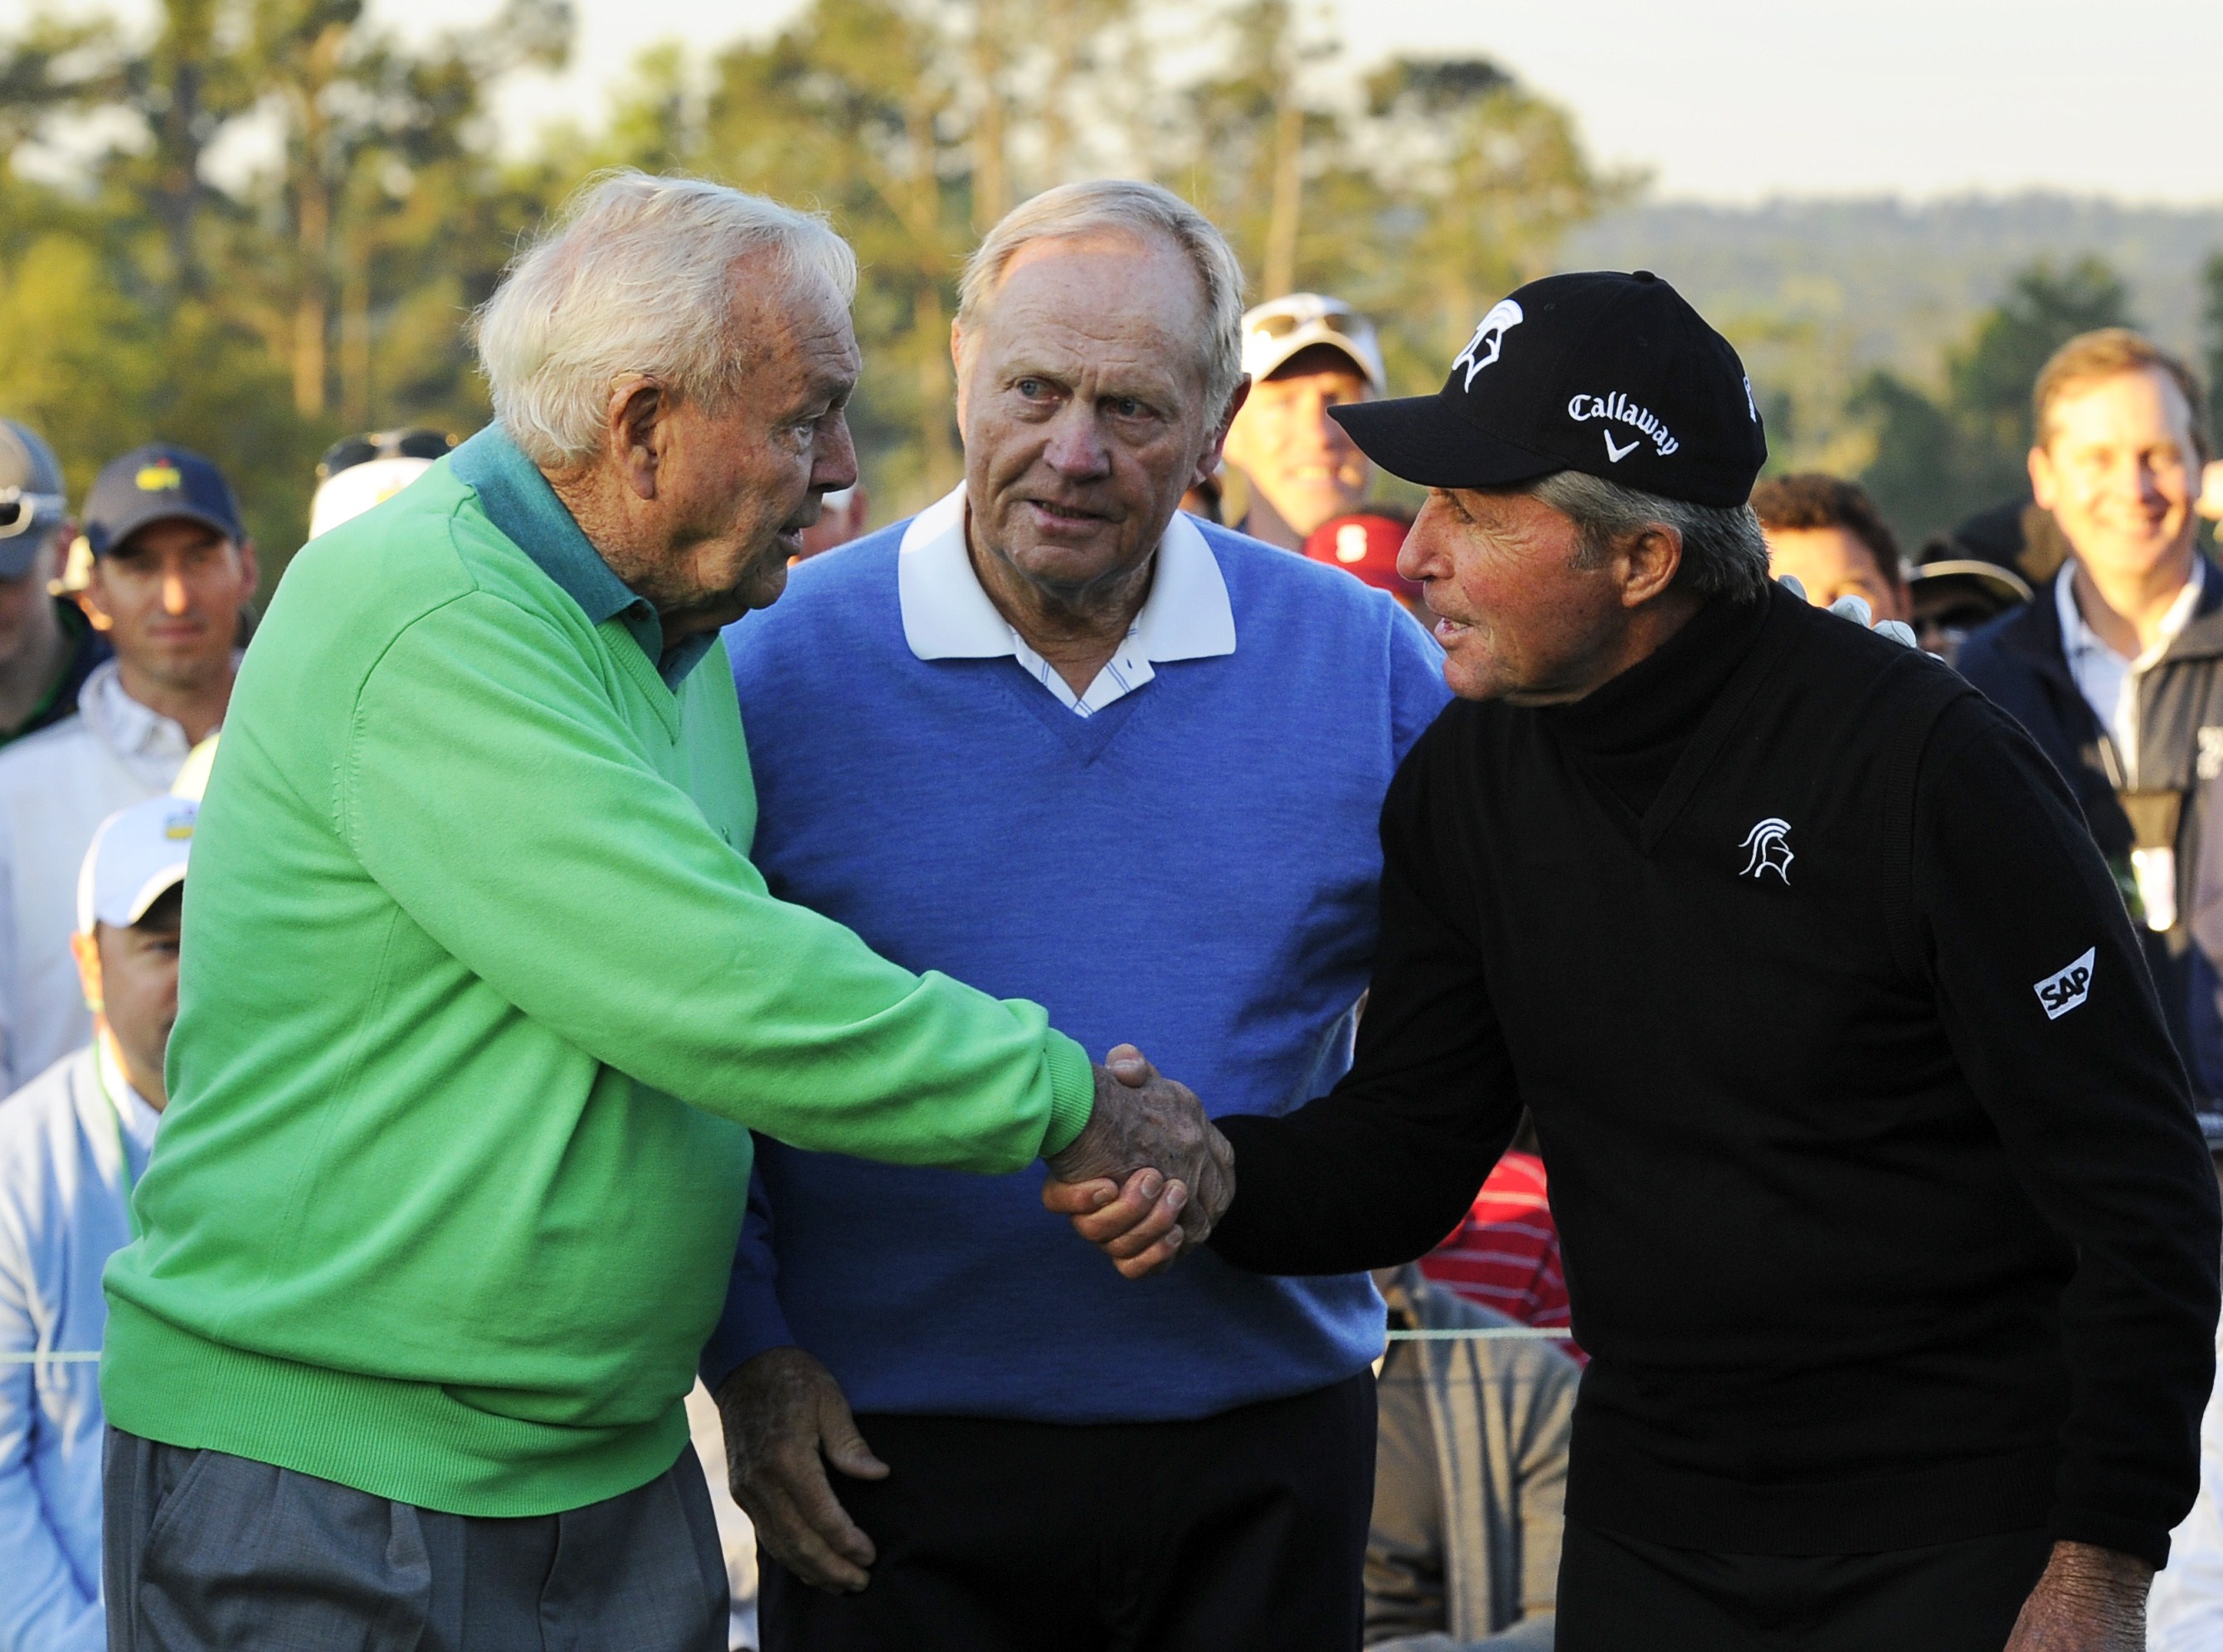 The Big Three - Palmer, Nicklaus and Player - are the Masters' honorary starters (Photo: Getty Images)